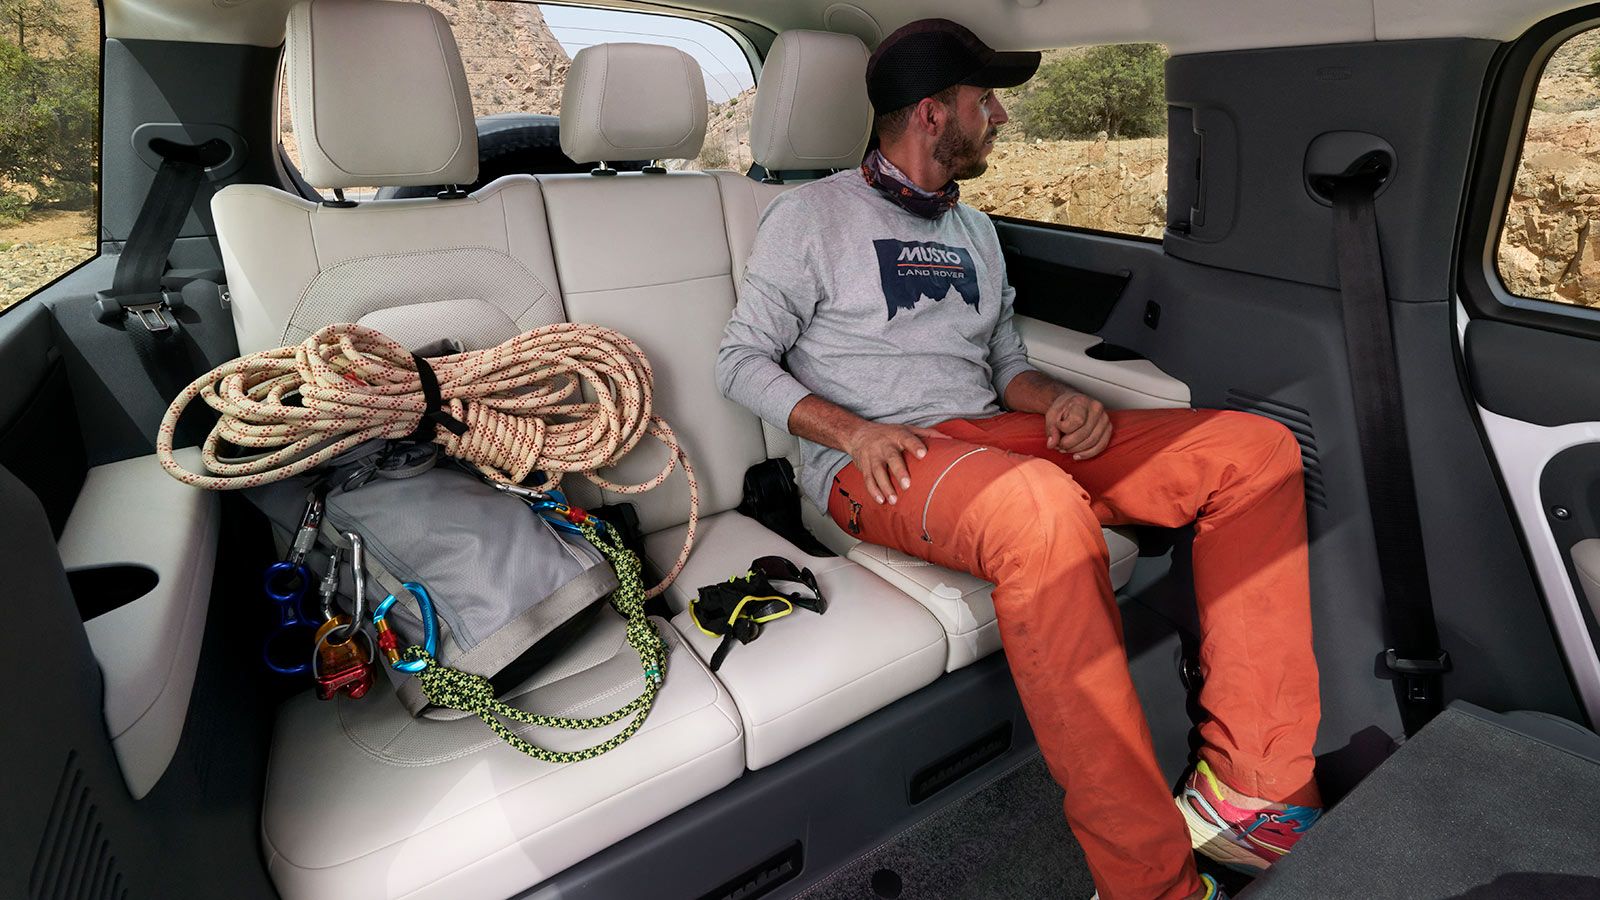 Land Rover defender 130 third row seat with a passenger and his climbing gear